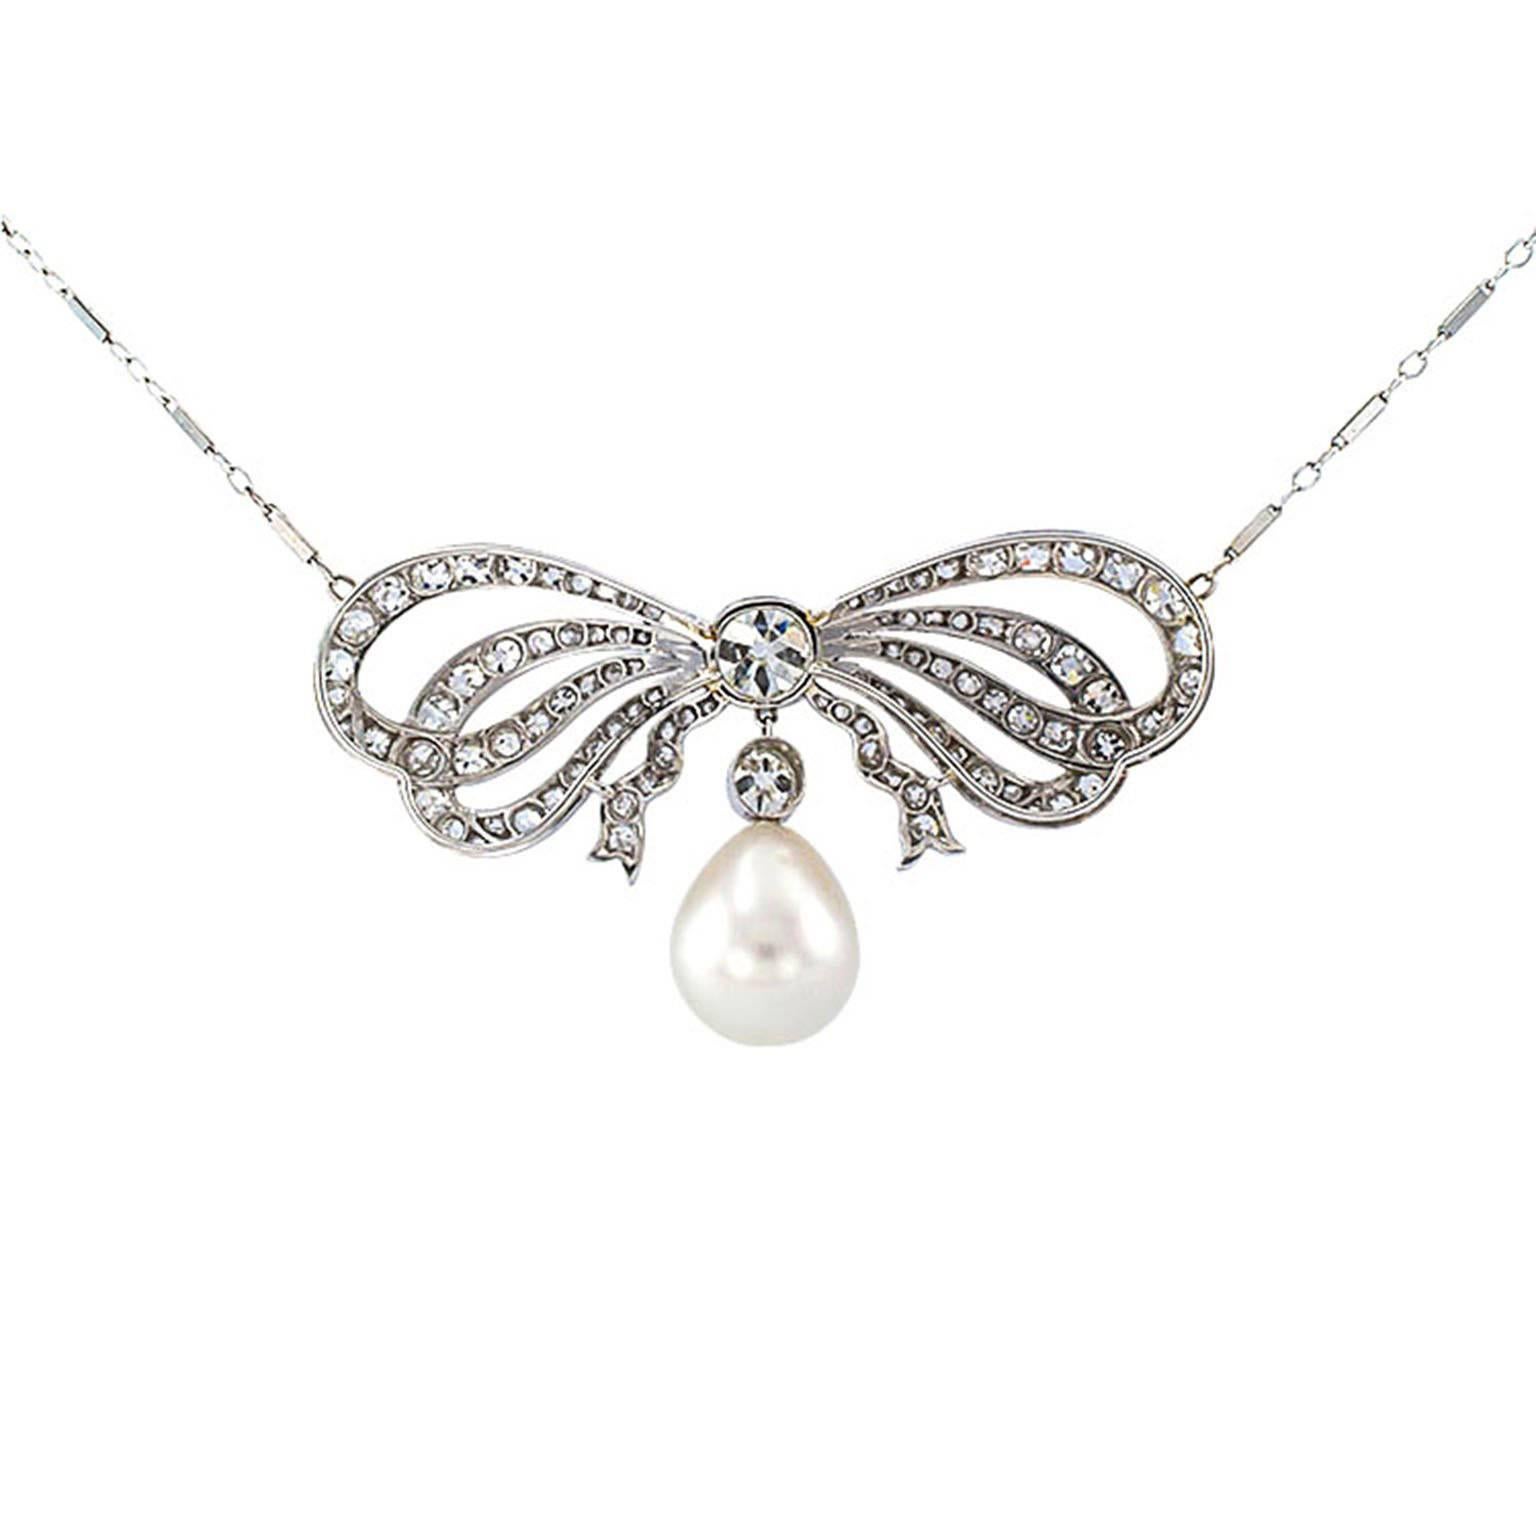 Edwardian Diamond and South Sea Pearl Bow Necklace

Centering upon a nice old Mine Cushion cut diamond weighing approximately 1.00 carat, approximately I - J color and VS clarity, tied up with a voluminous platinum bow, set with approximately 3.10